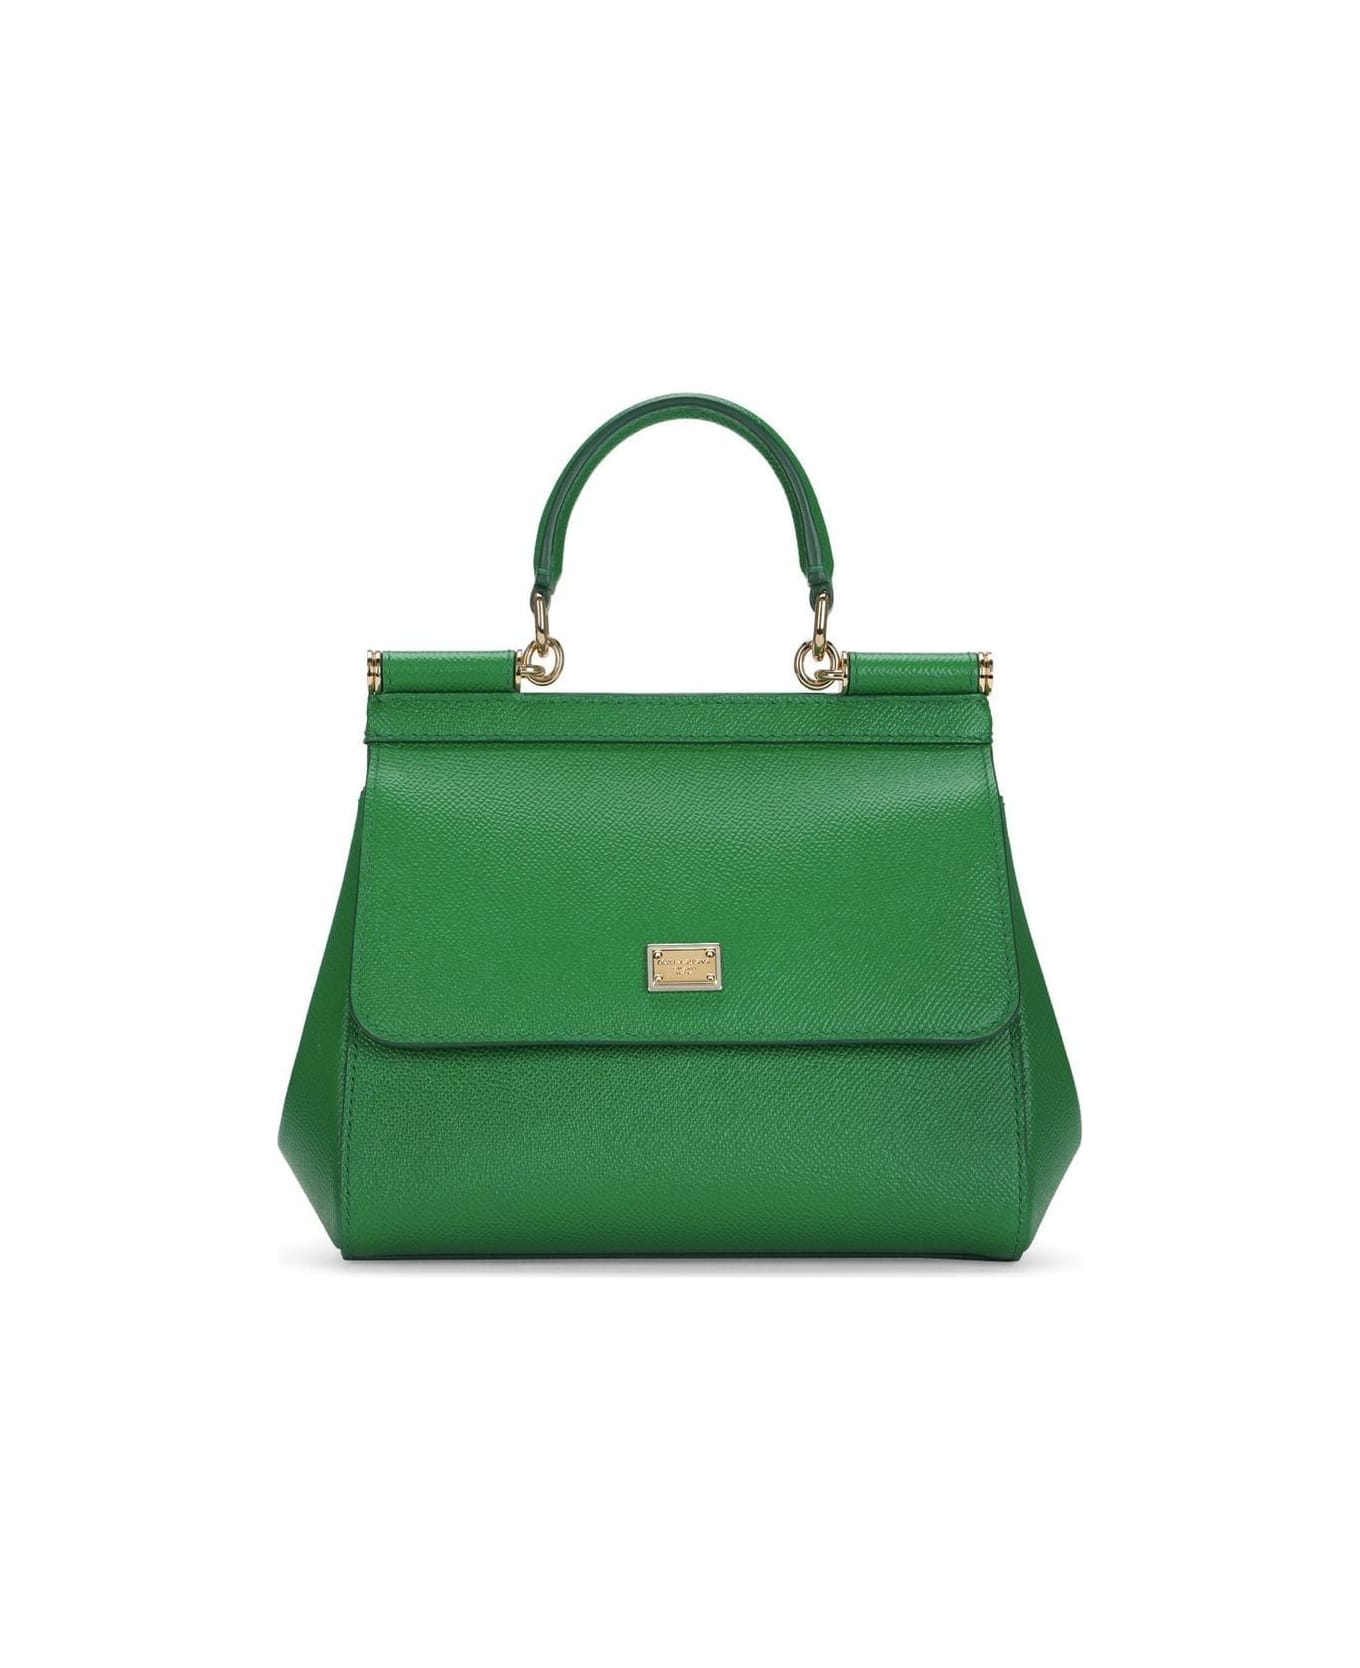 Dolce & Gabbana 'small Sicily' Green Handbag With Branded Galvanic Plaque In Dauphine Leather Woman - Green